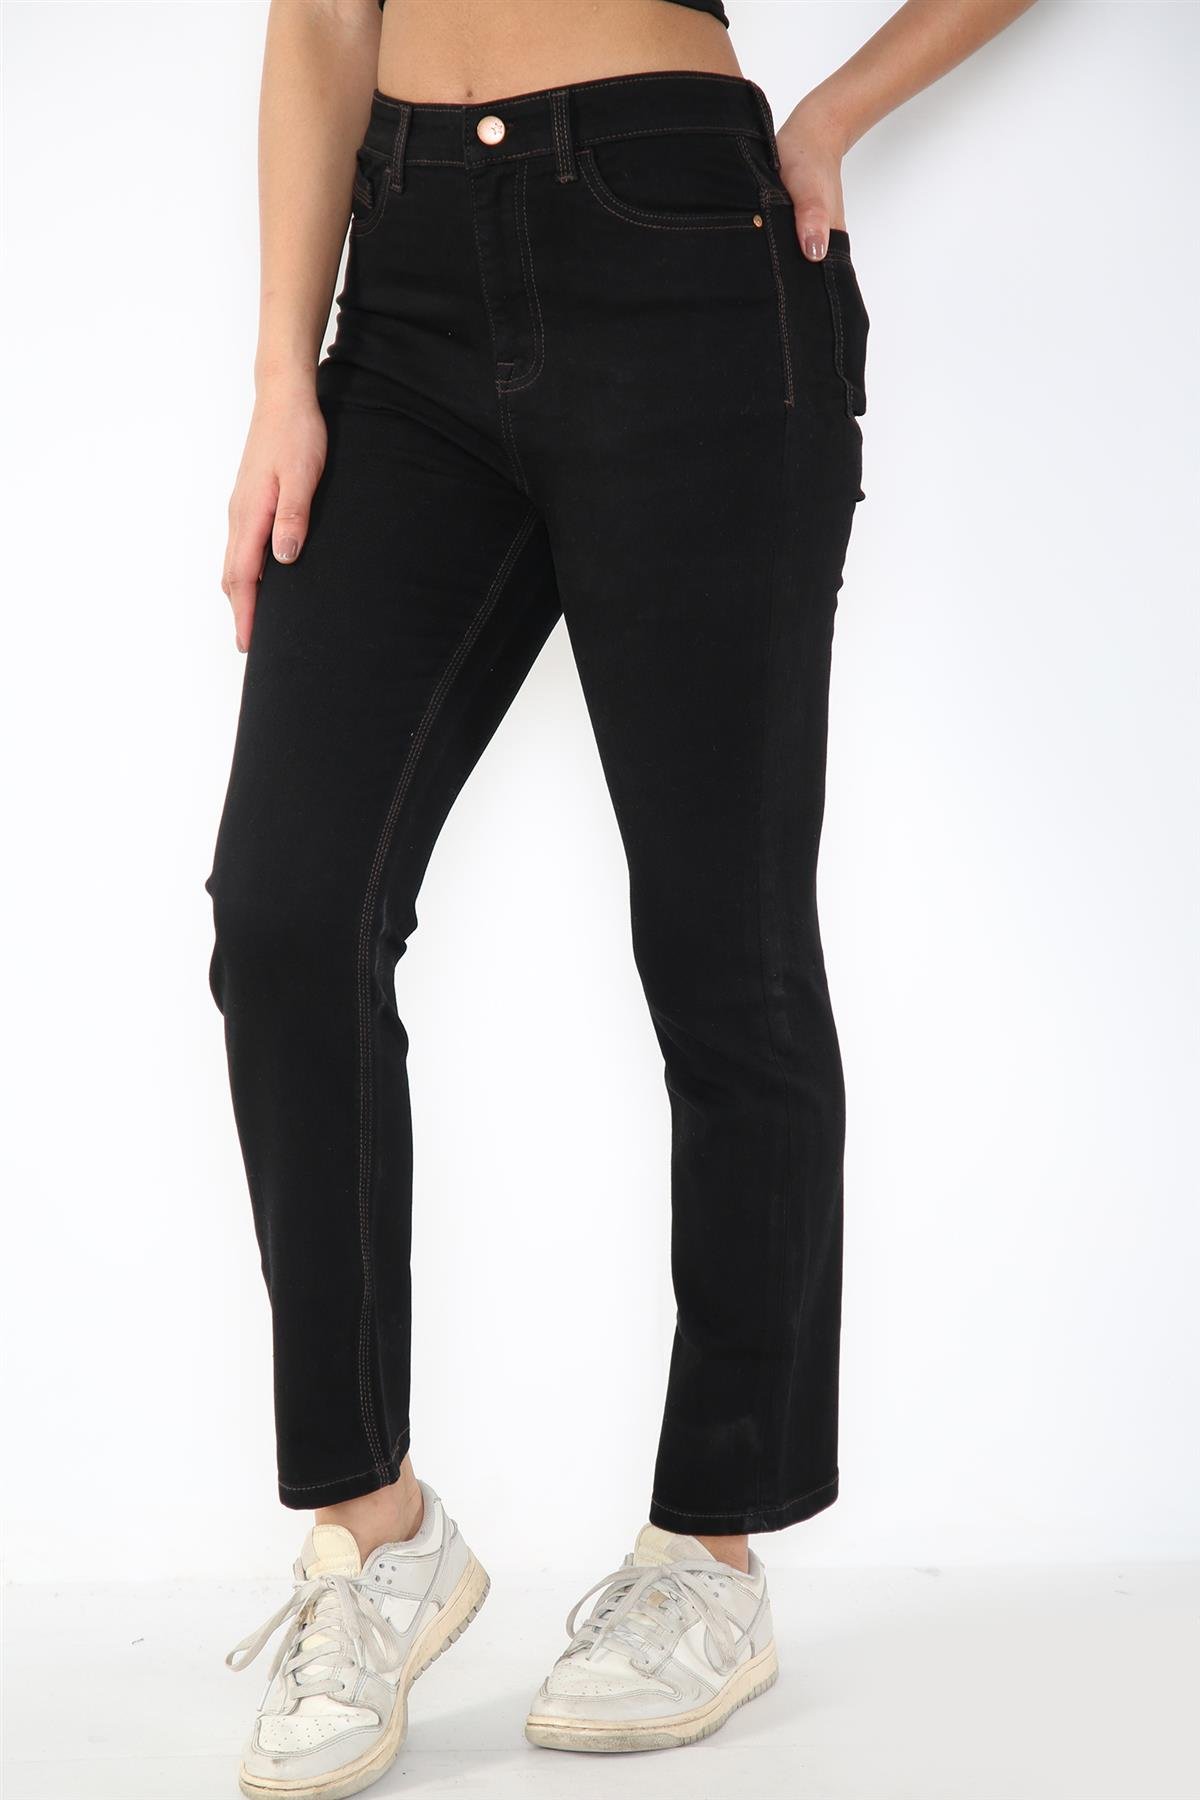 MYT Womens Magic Shaping Skinny Jeans Stretch High Waisted Ladies